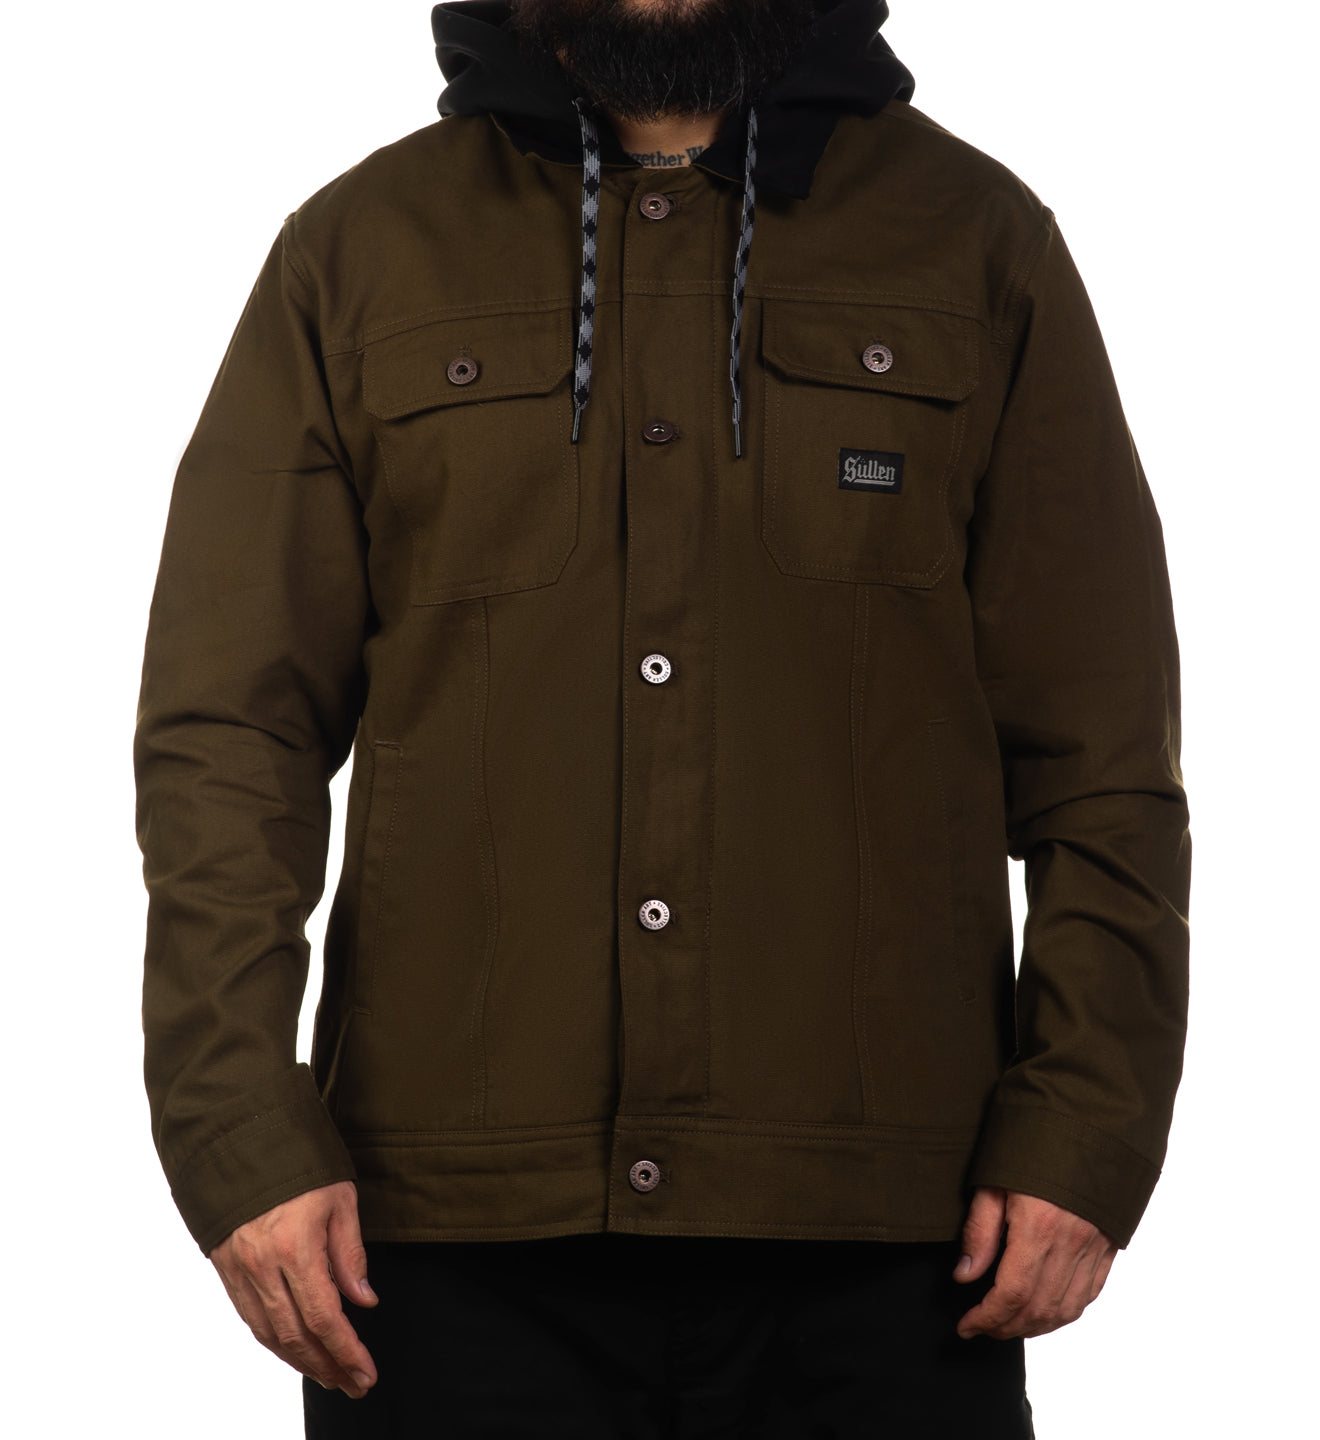 DUCK CANVAS HOODED JKT ARMY GREEN